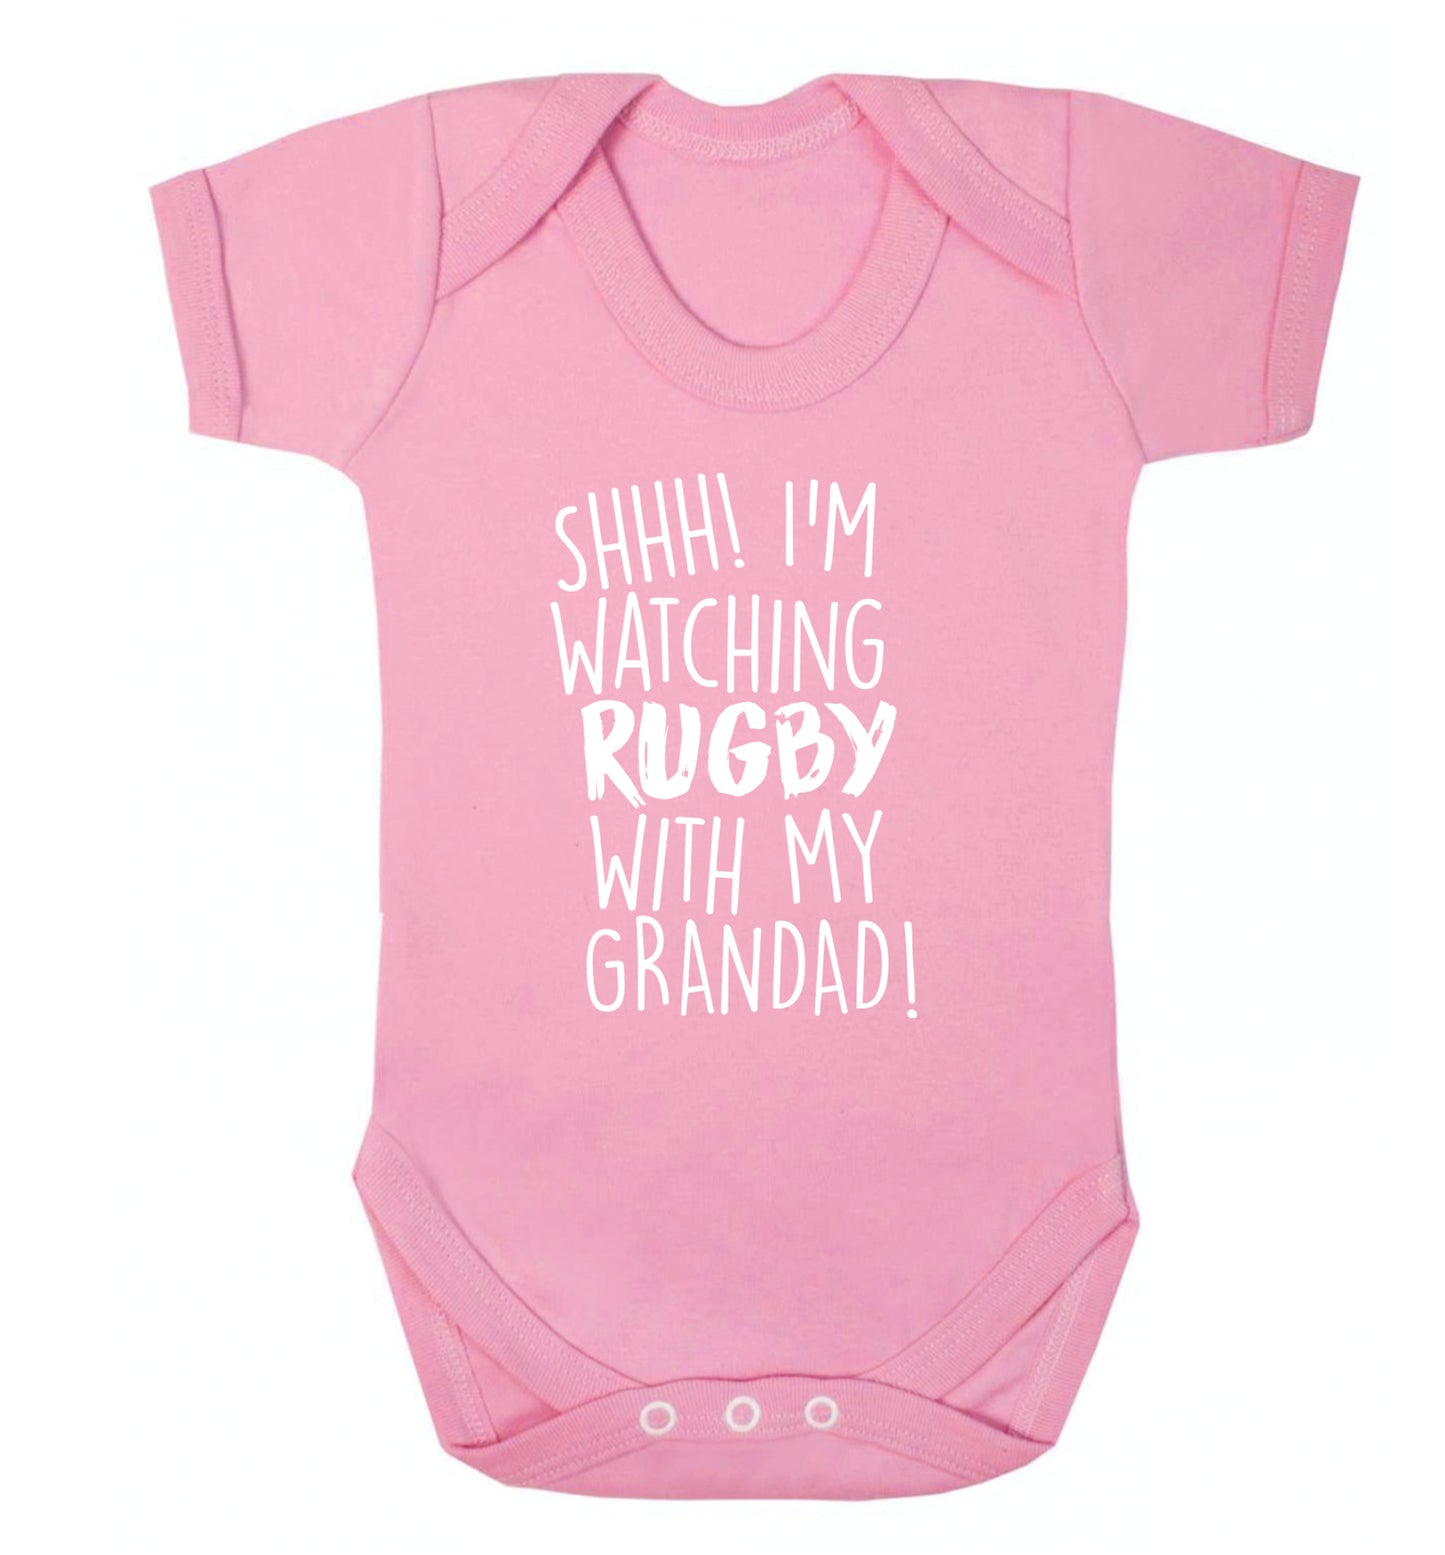 Shh I'm watching rugby with my grandad Baby Vest pale pink 18-24 months